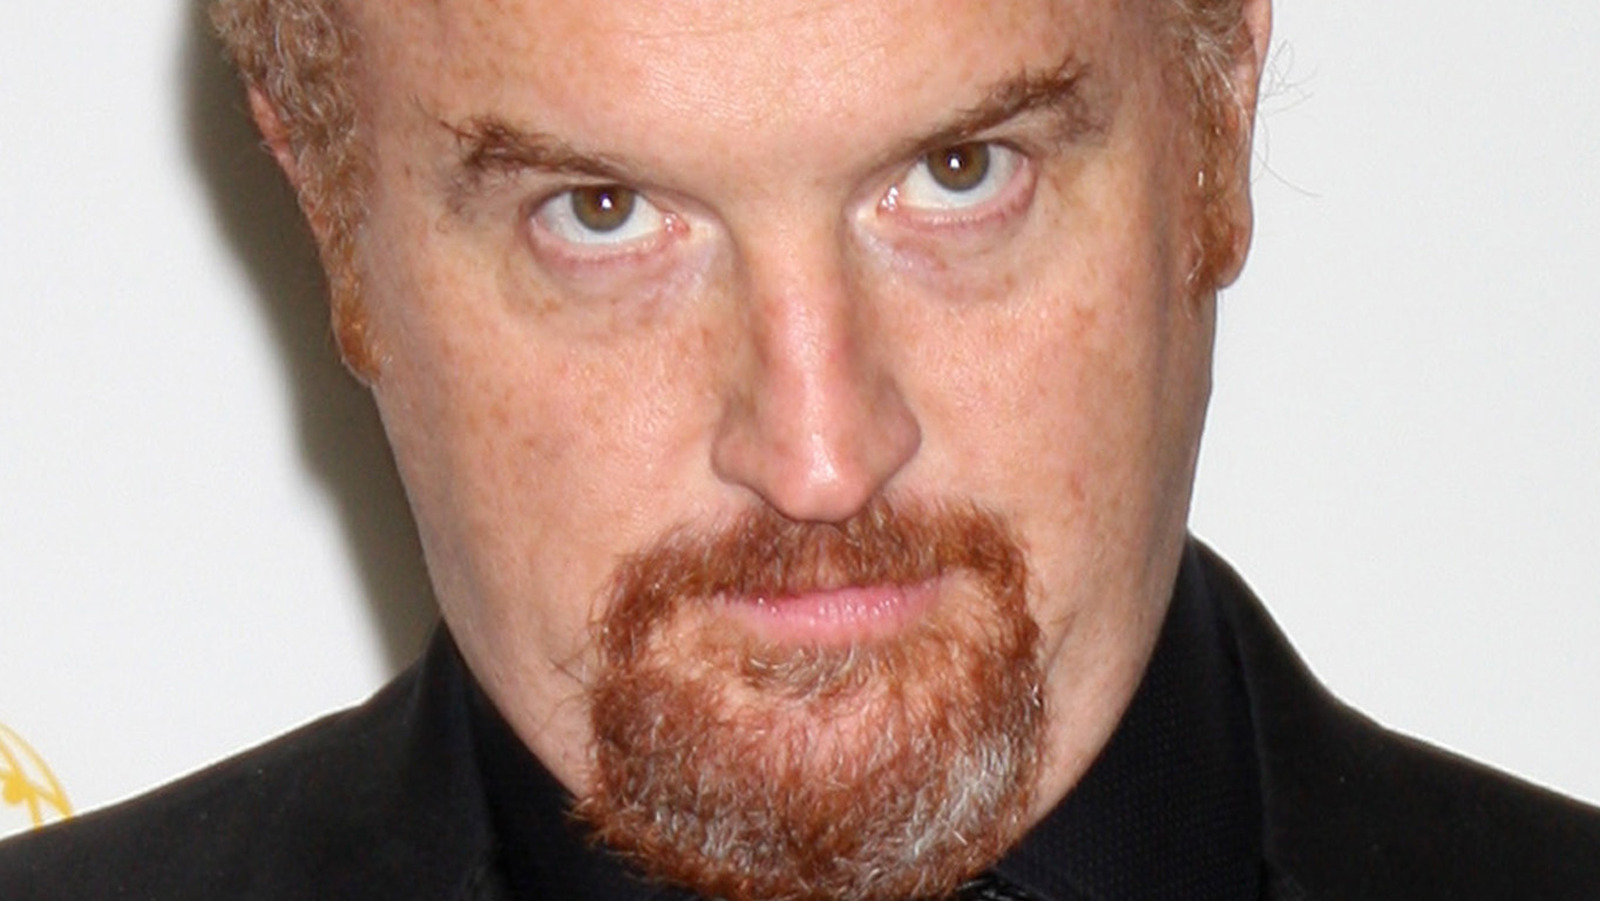 Louis CK Addresses Sexual Misconduct Scandal In Comedy Special